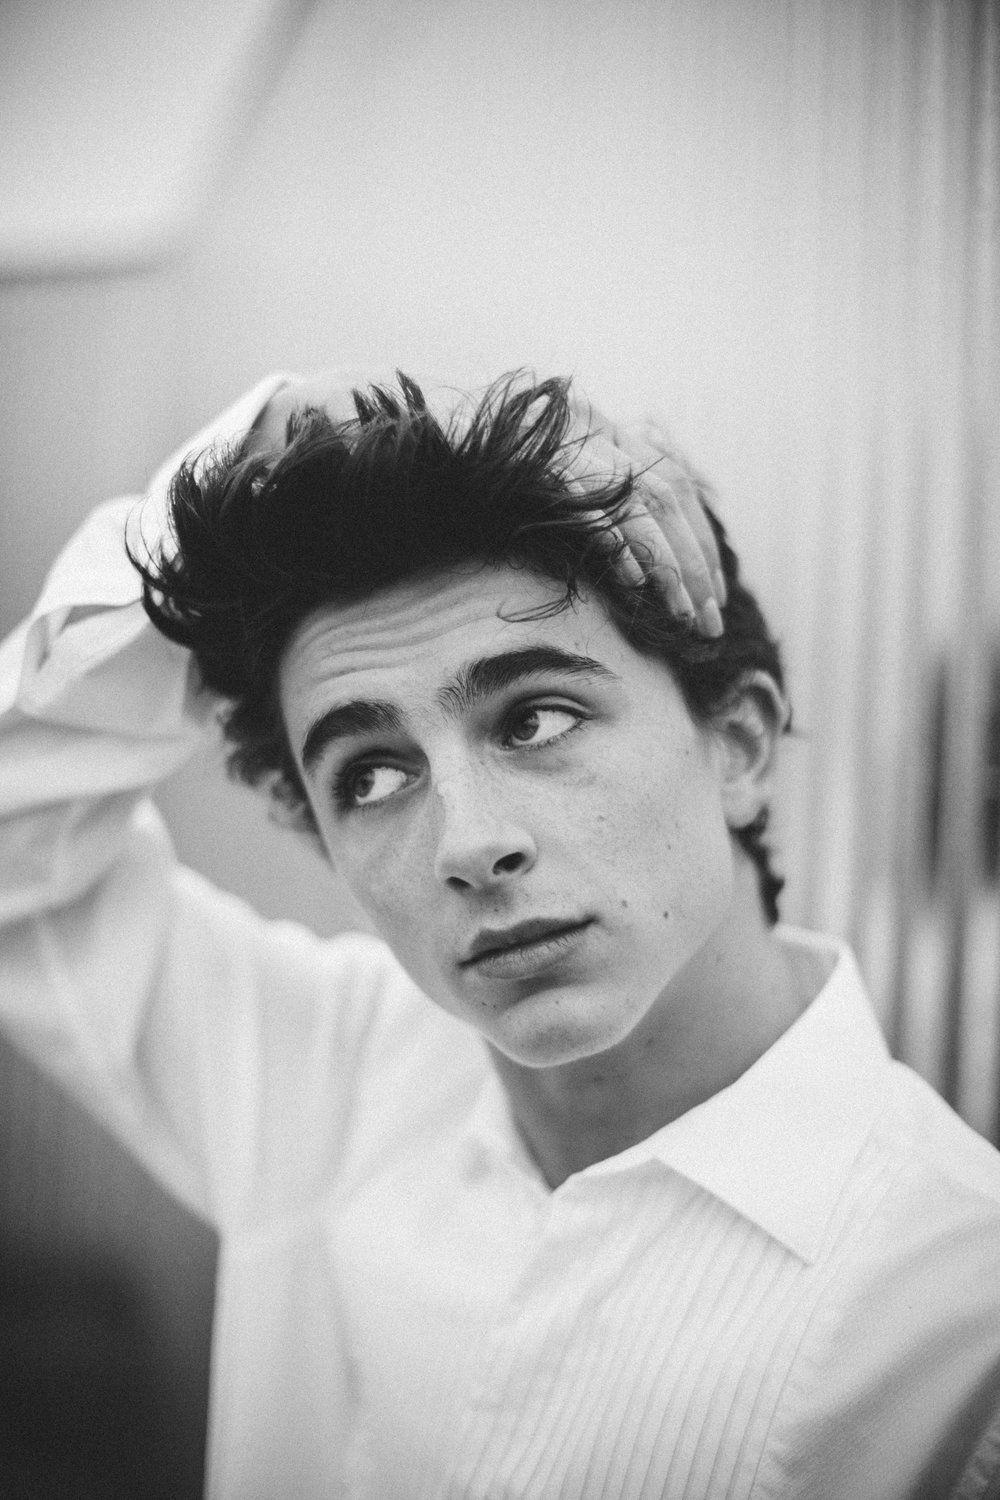 A man in white shirt and tie is looking at the camera - Timothee Chalamet